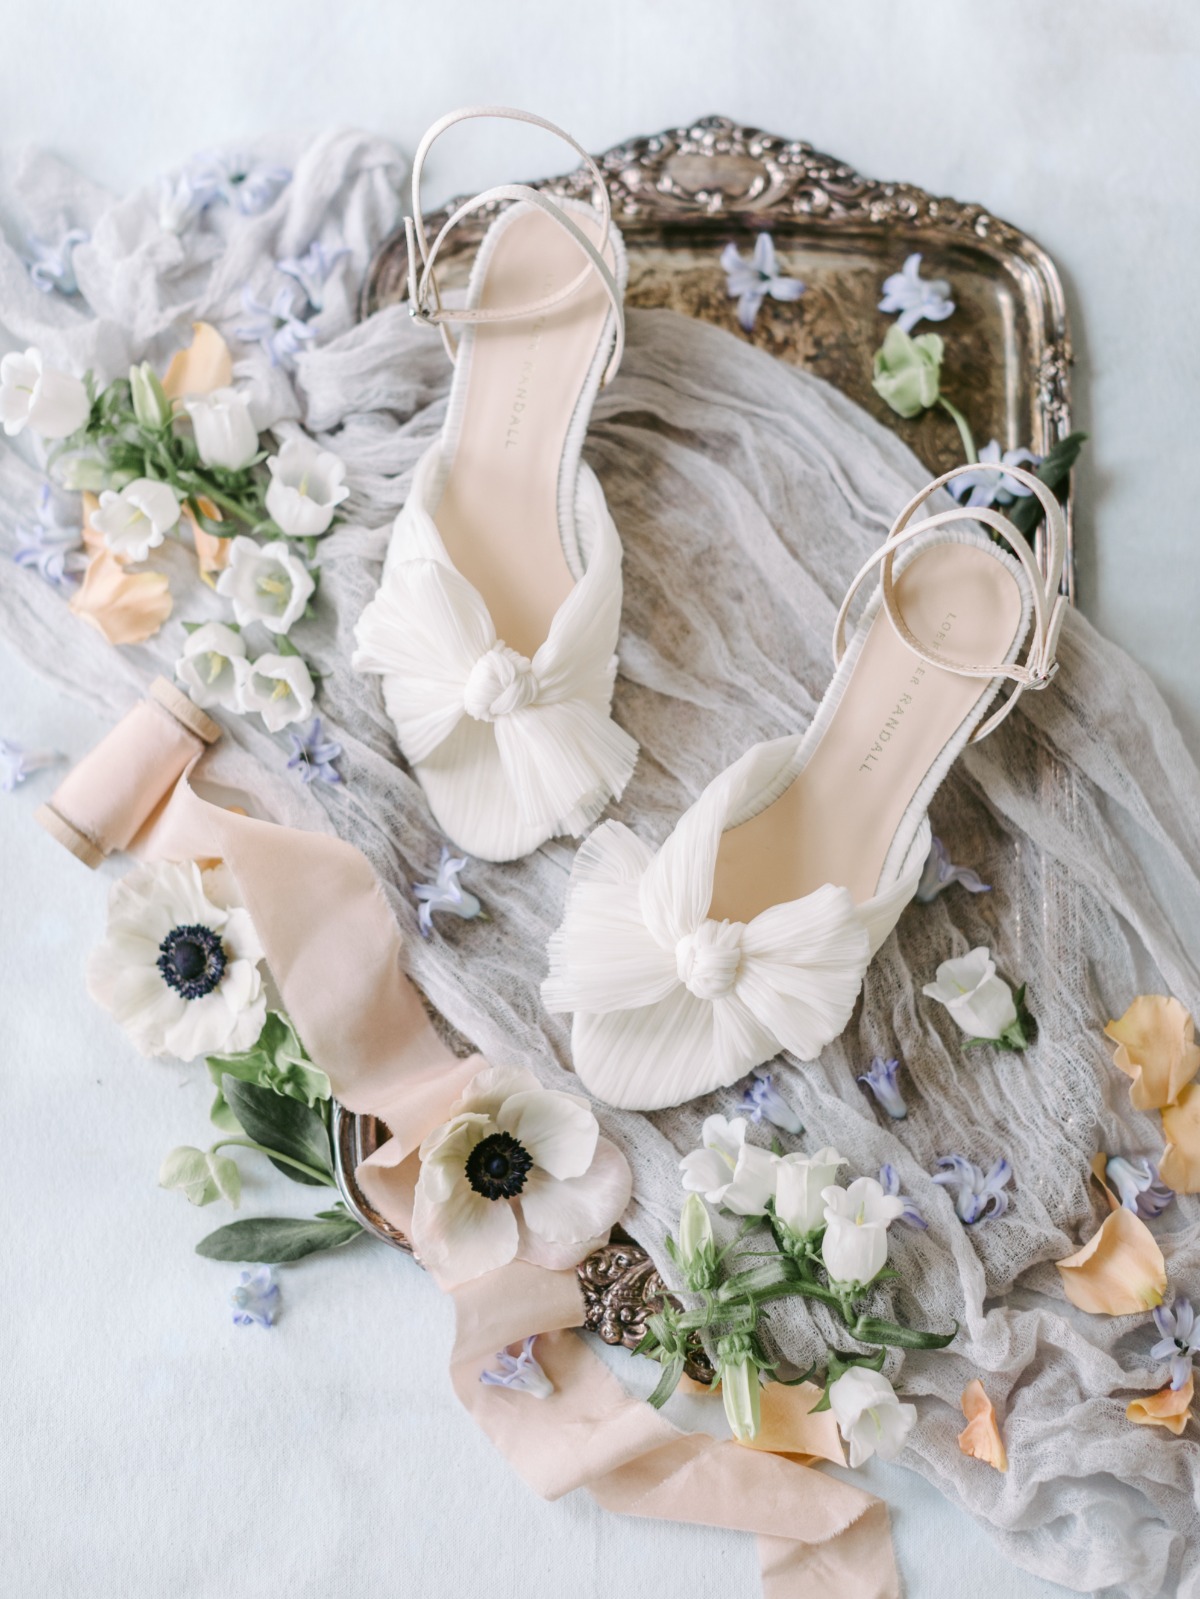 Cream wedding shoes on top of gauze fabric, flowers, and tray